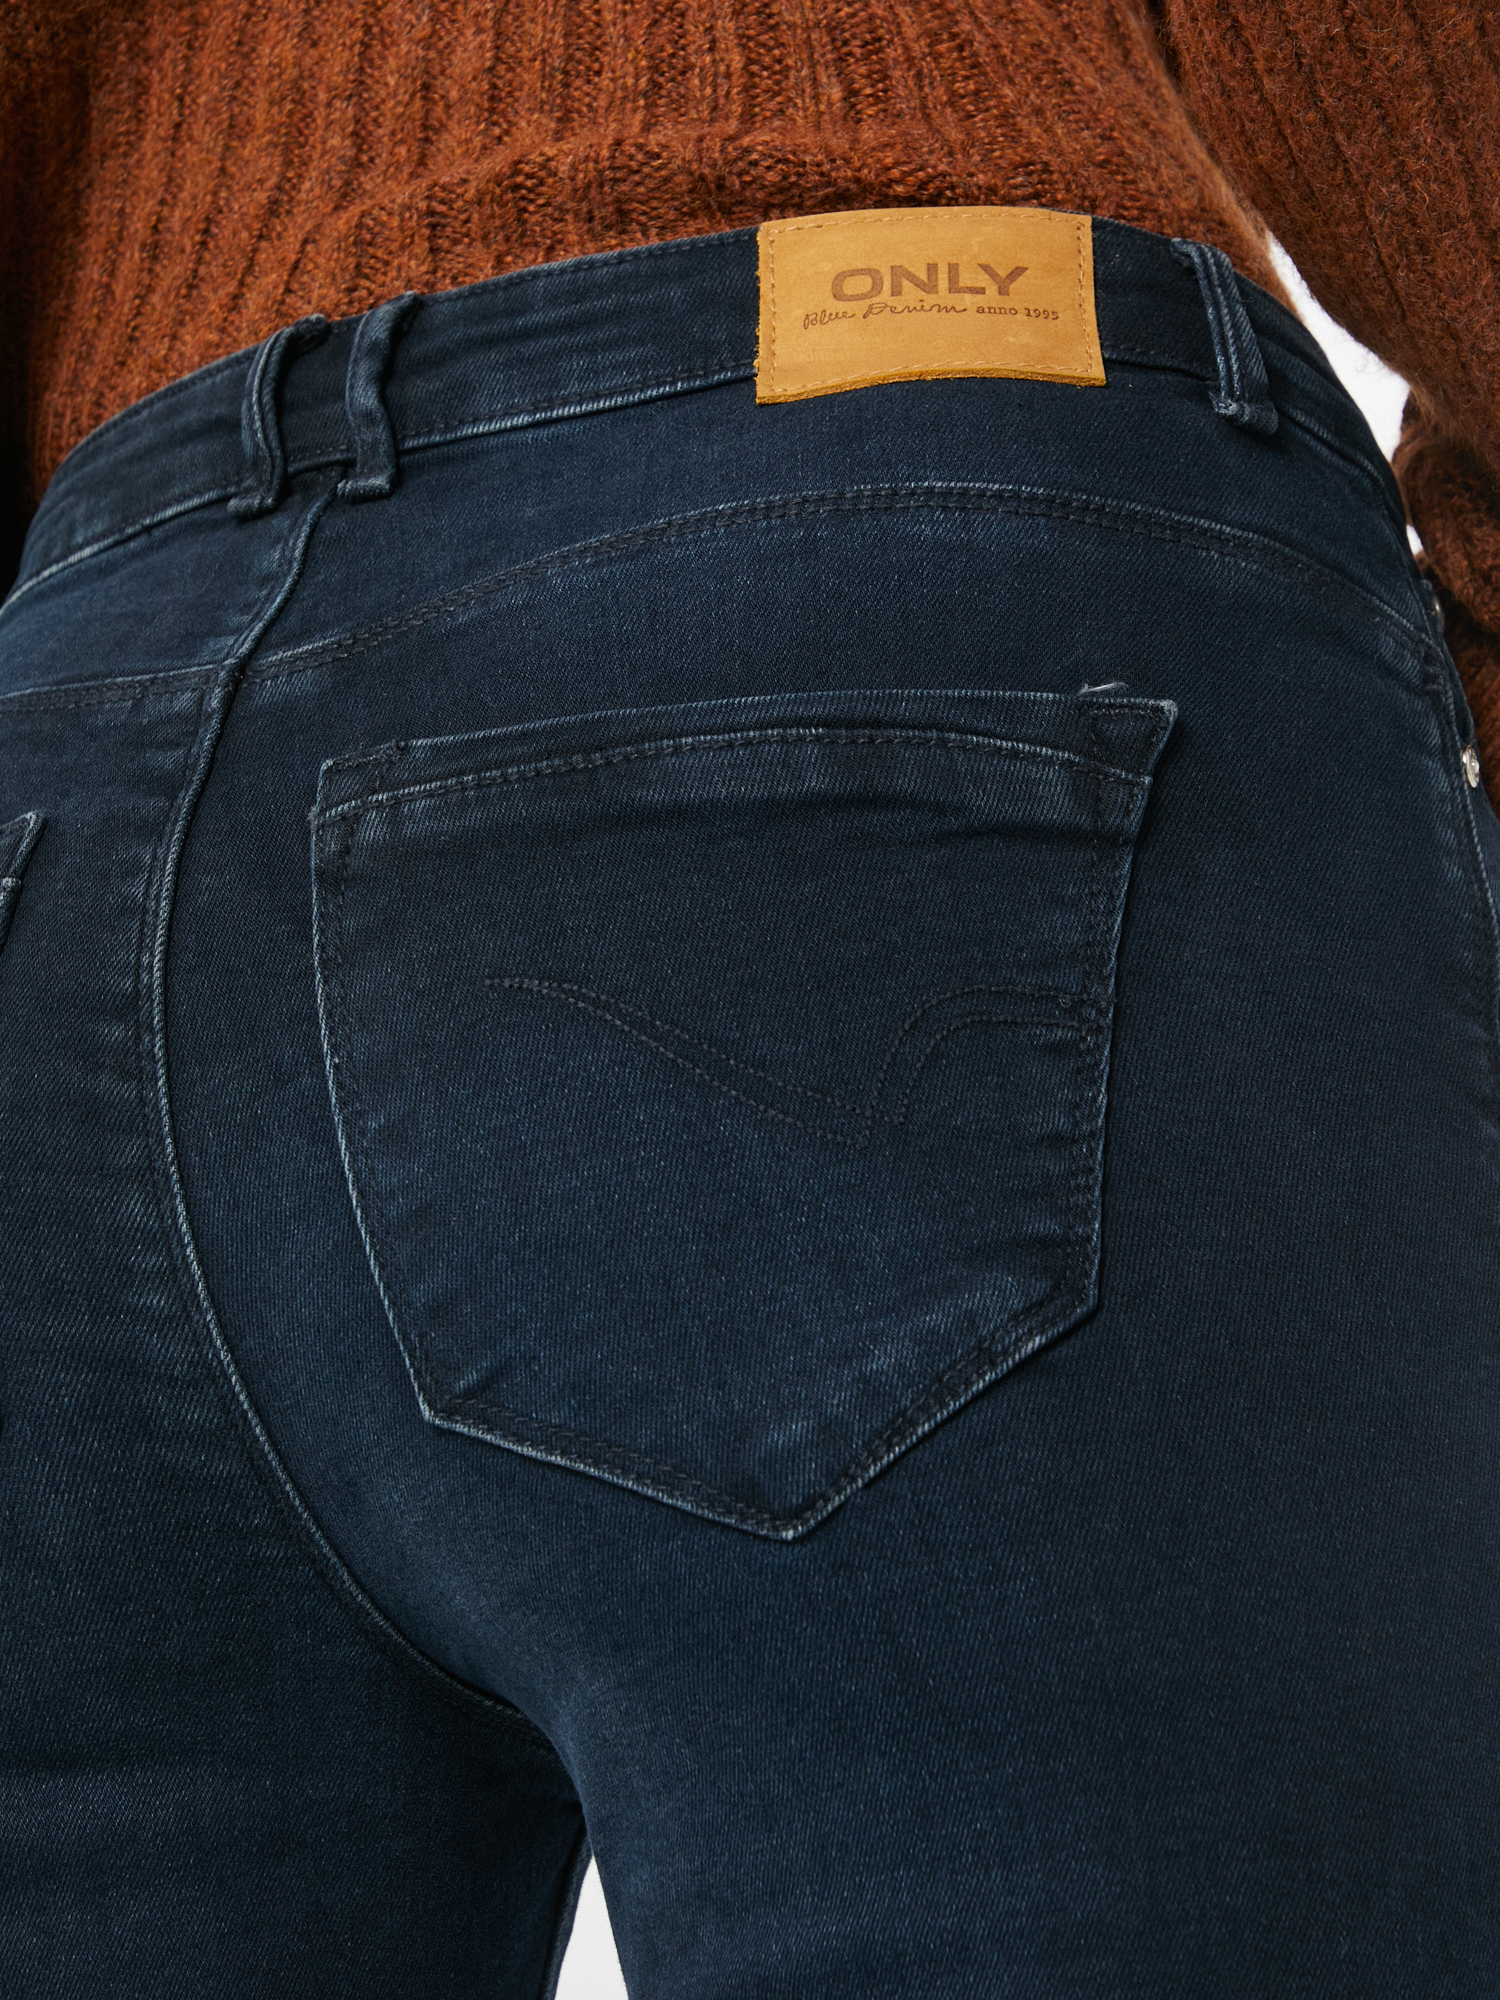 ONLY Jeans Paola in Blau 